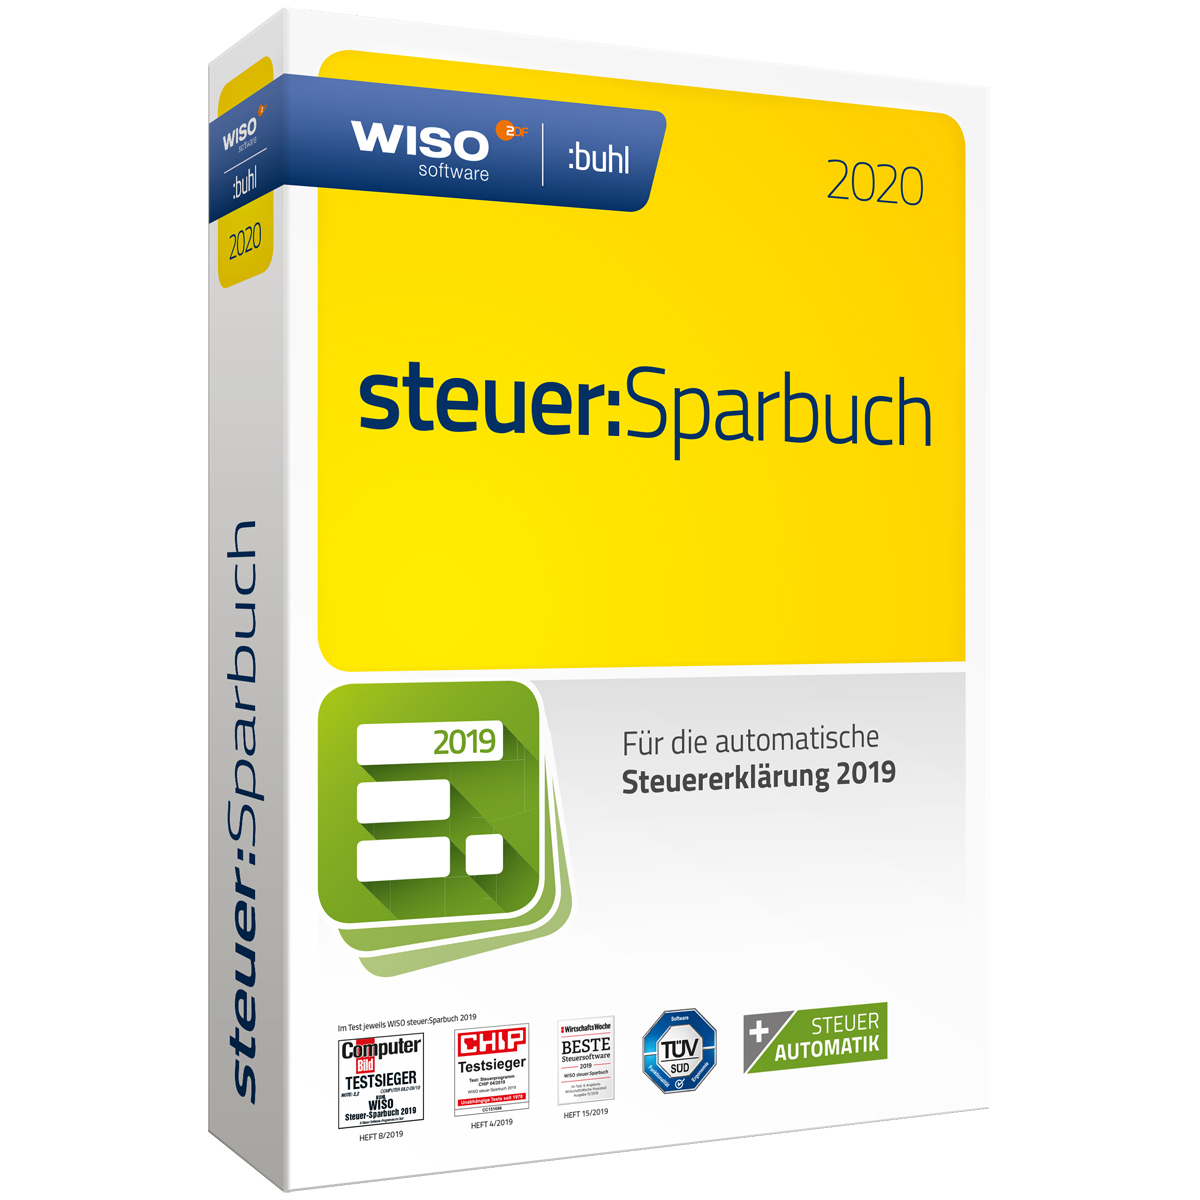 BUHL ESD WISO steuer:Sparbuch 2020